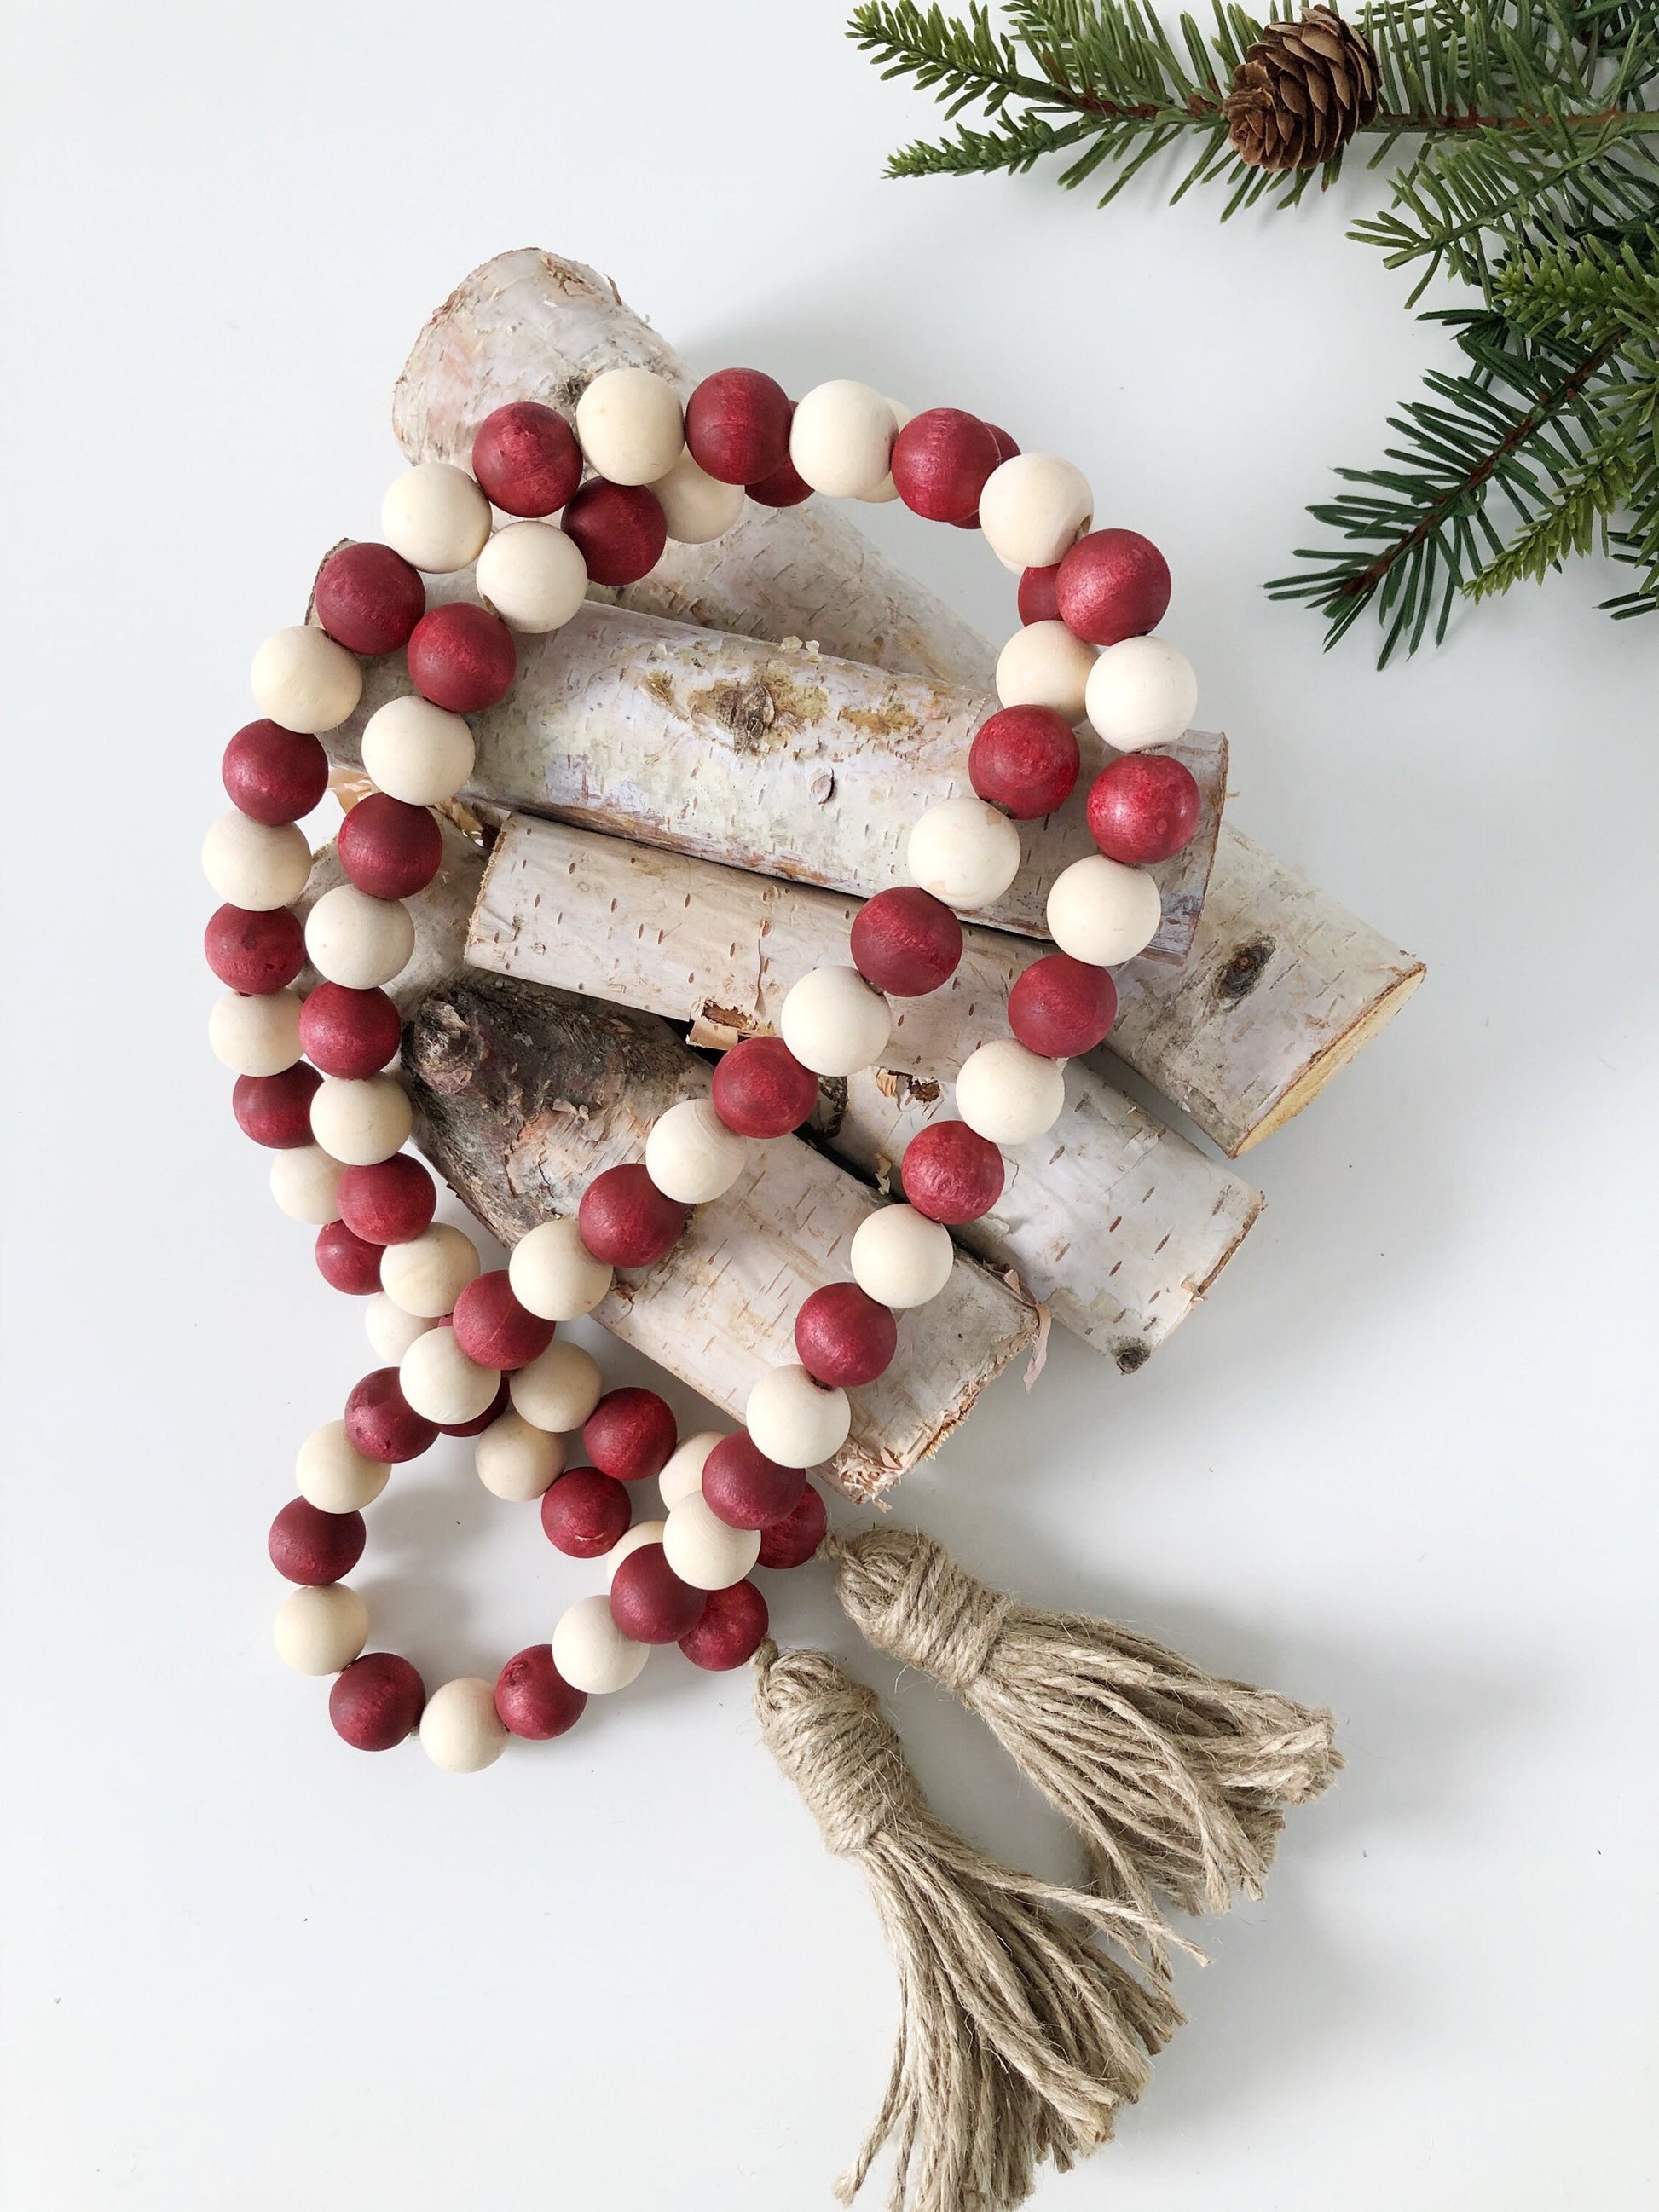 Wooden Bead Garland Decor White & Red Beads Pendant Wood Bead Garland For Christmas  Tree Table